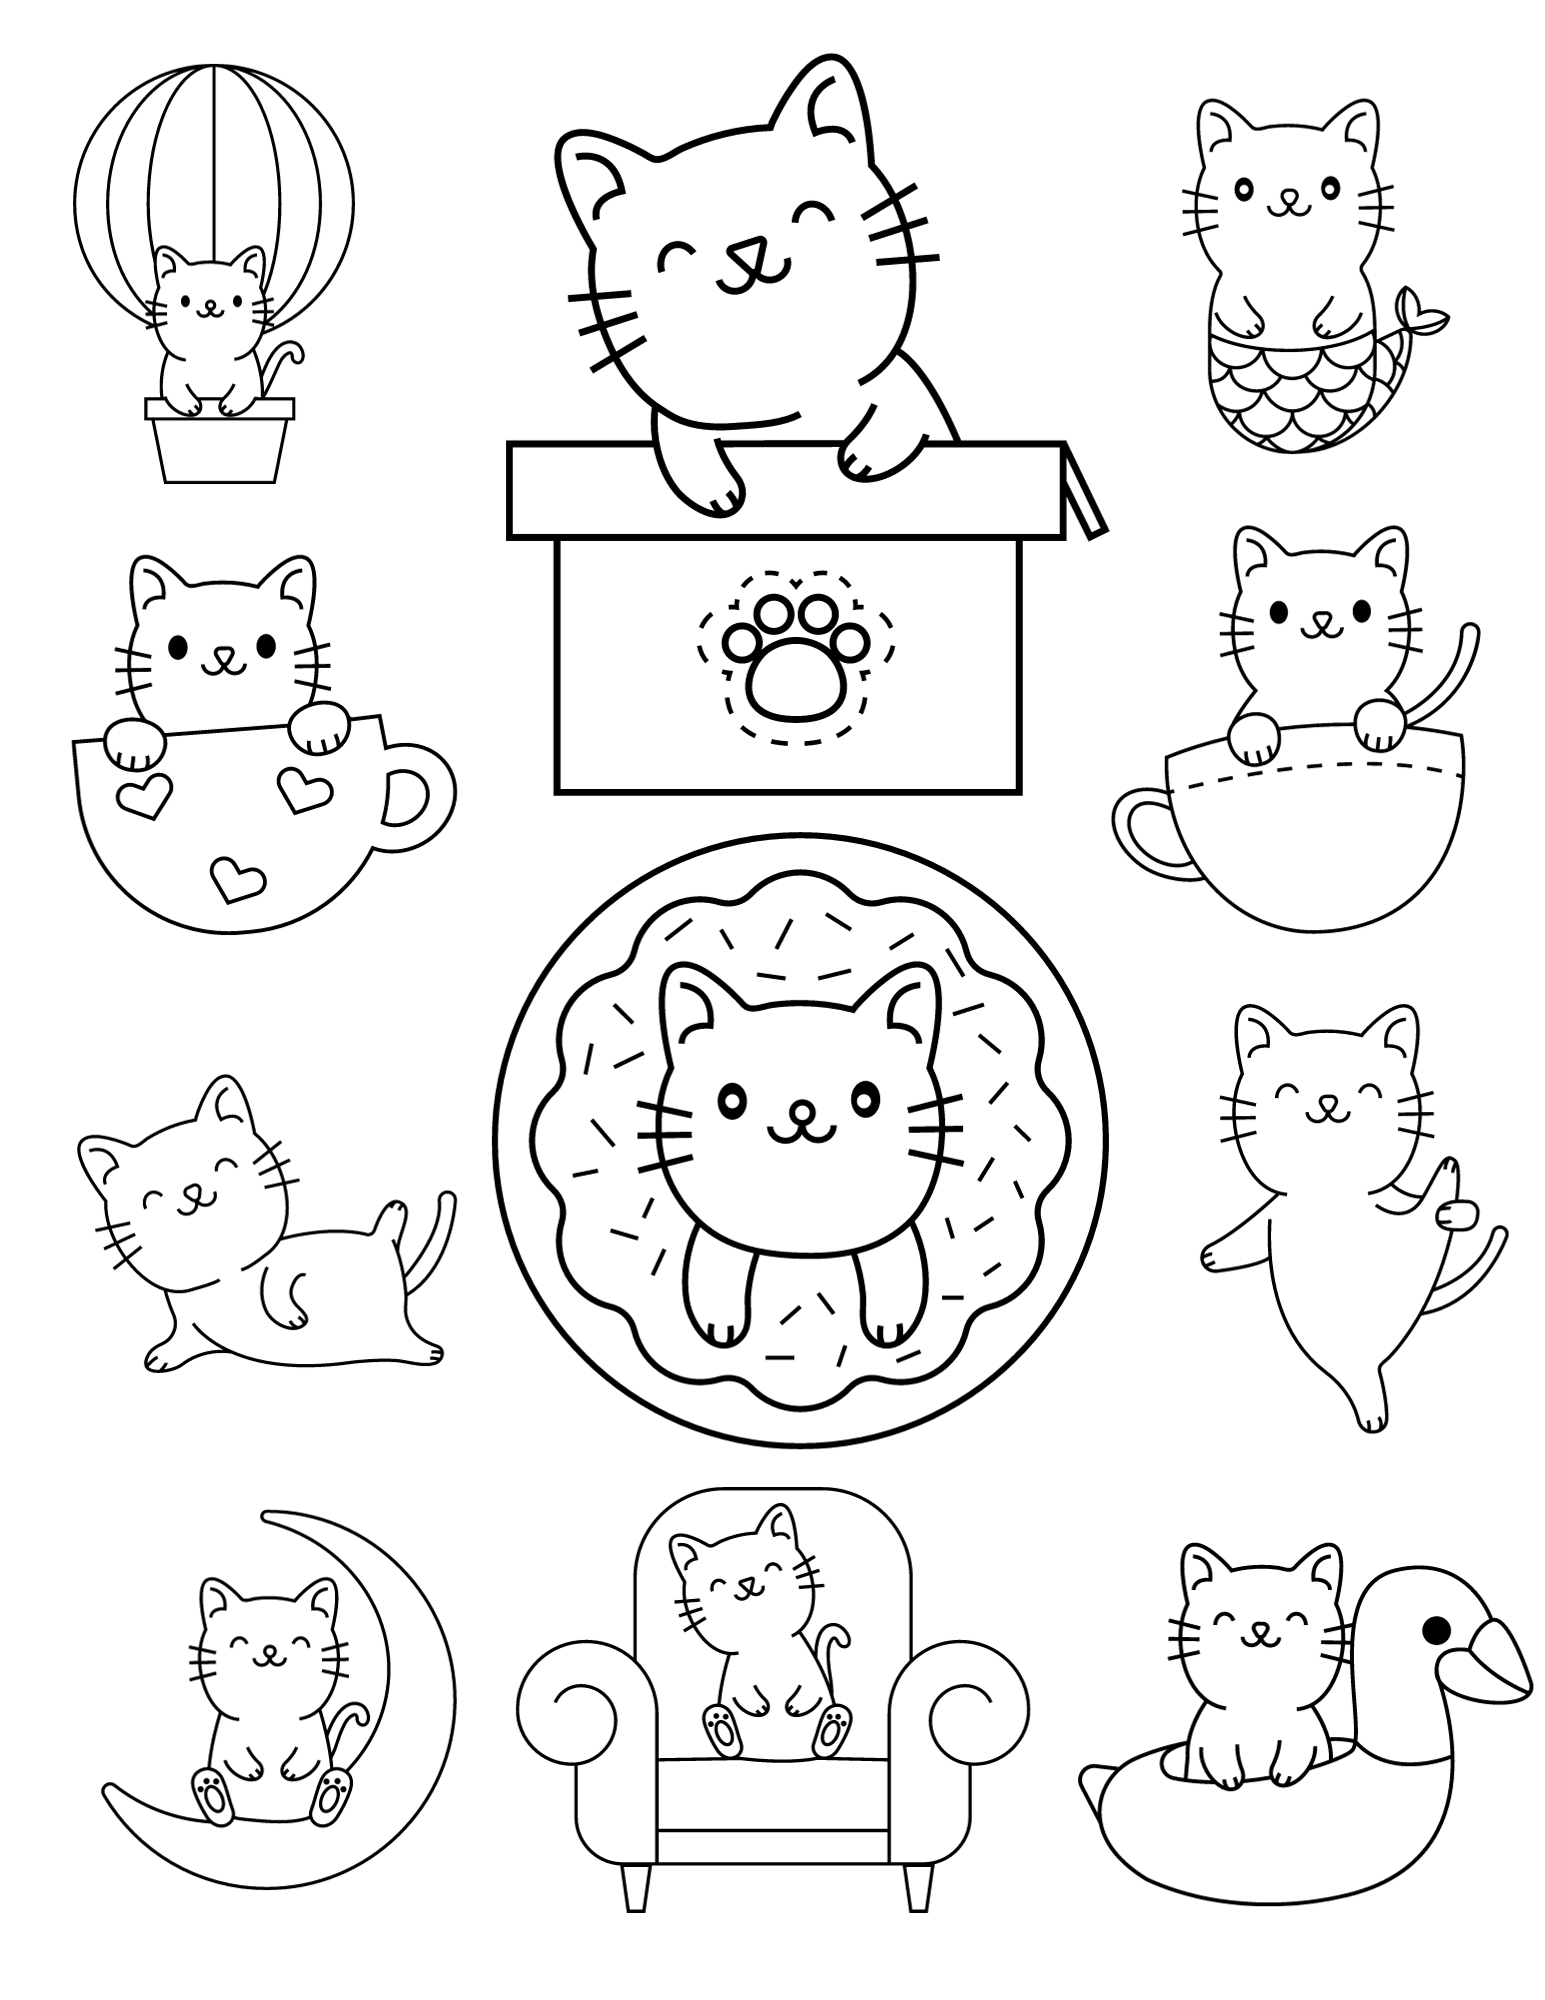 Cute kitten coloring pages for kids and adults